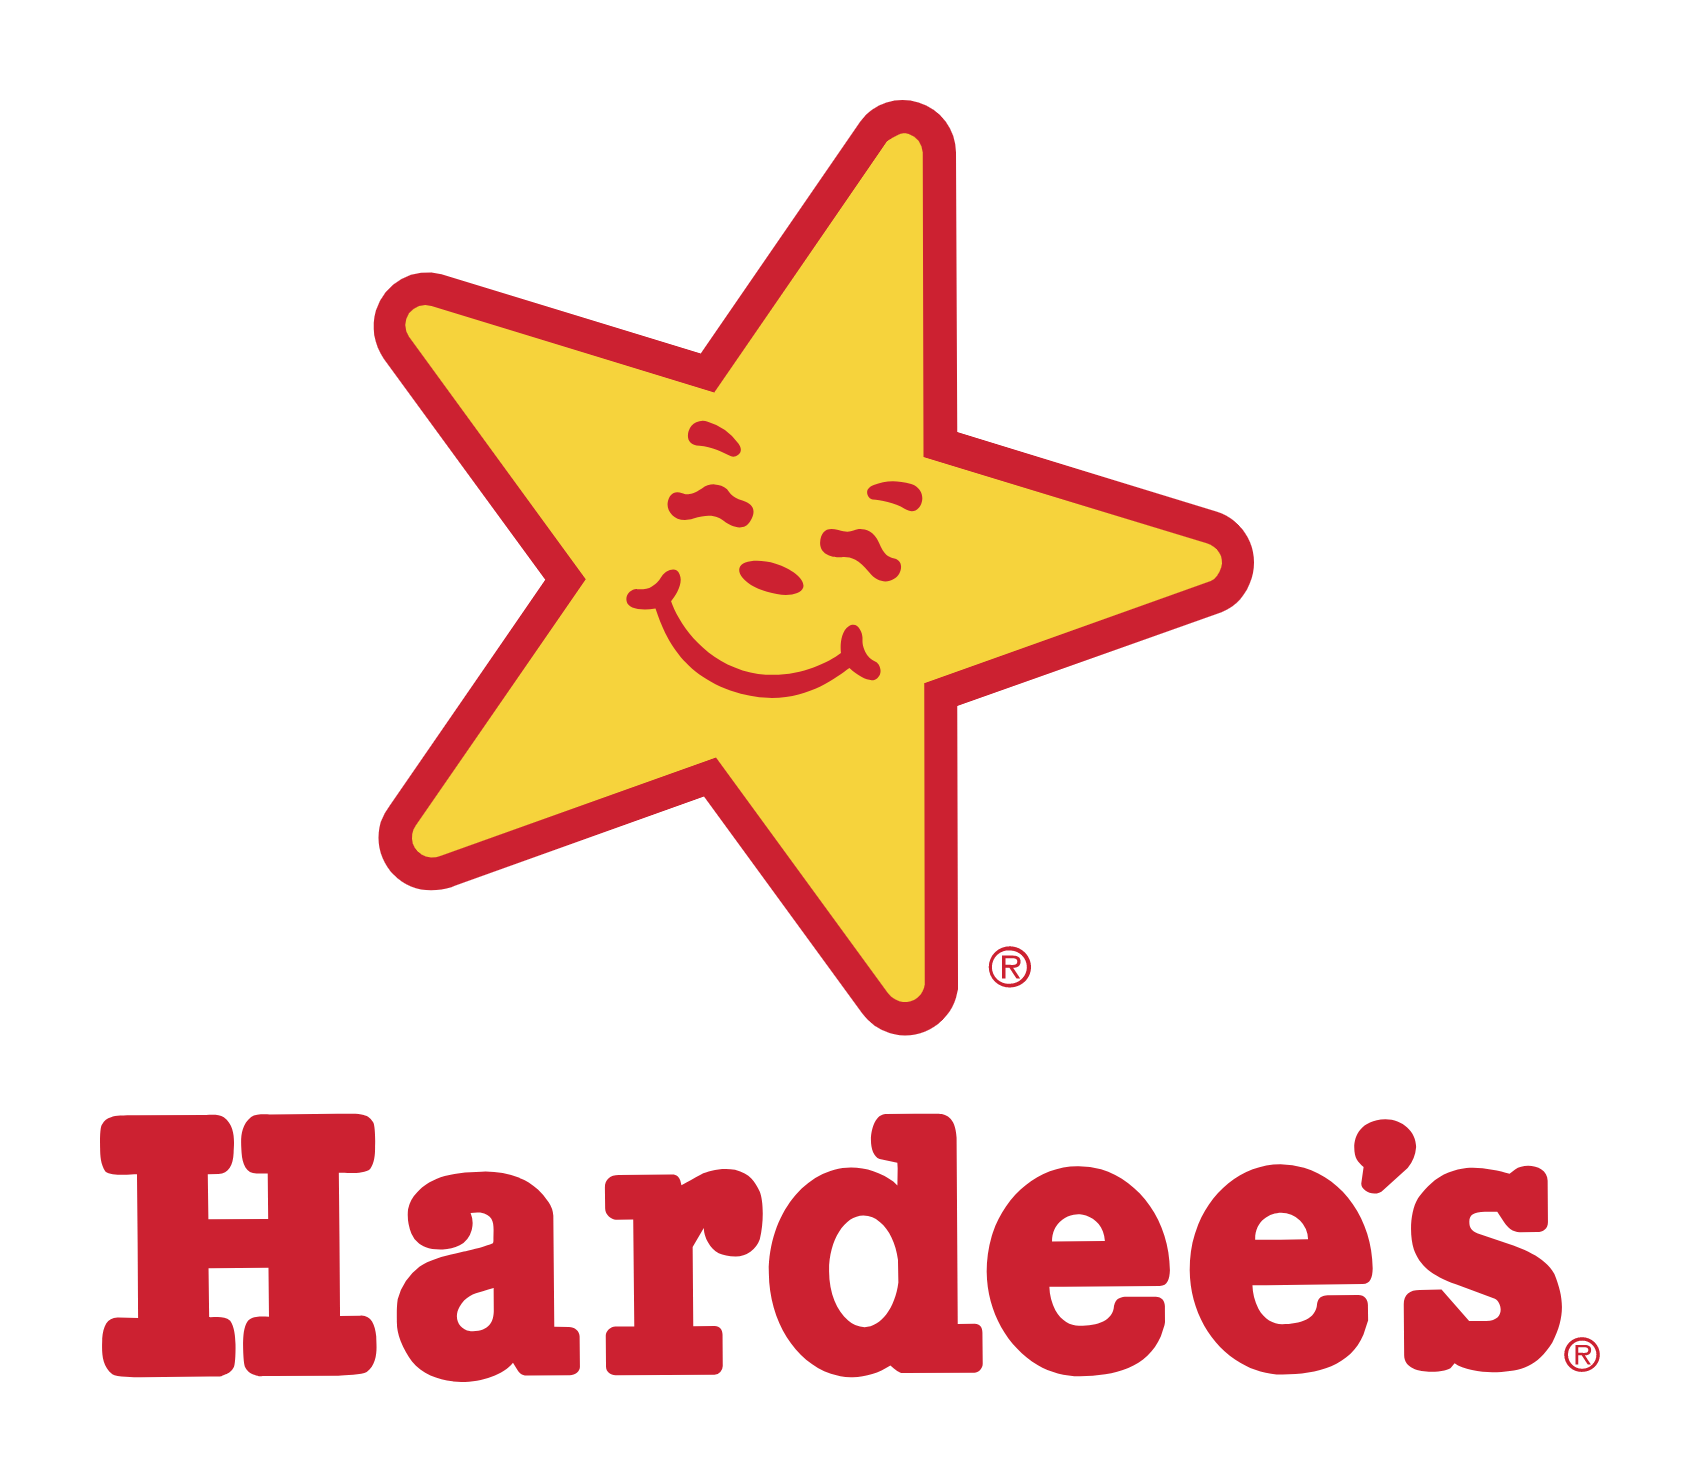 Download Hardee's Restaurant Logo PNG and Vector (PDF, SVG, Ai, EPS) Free